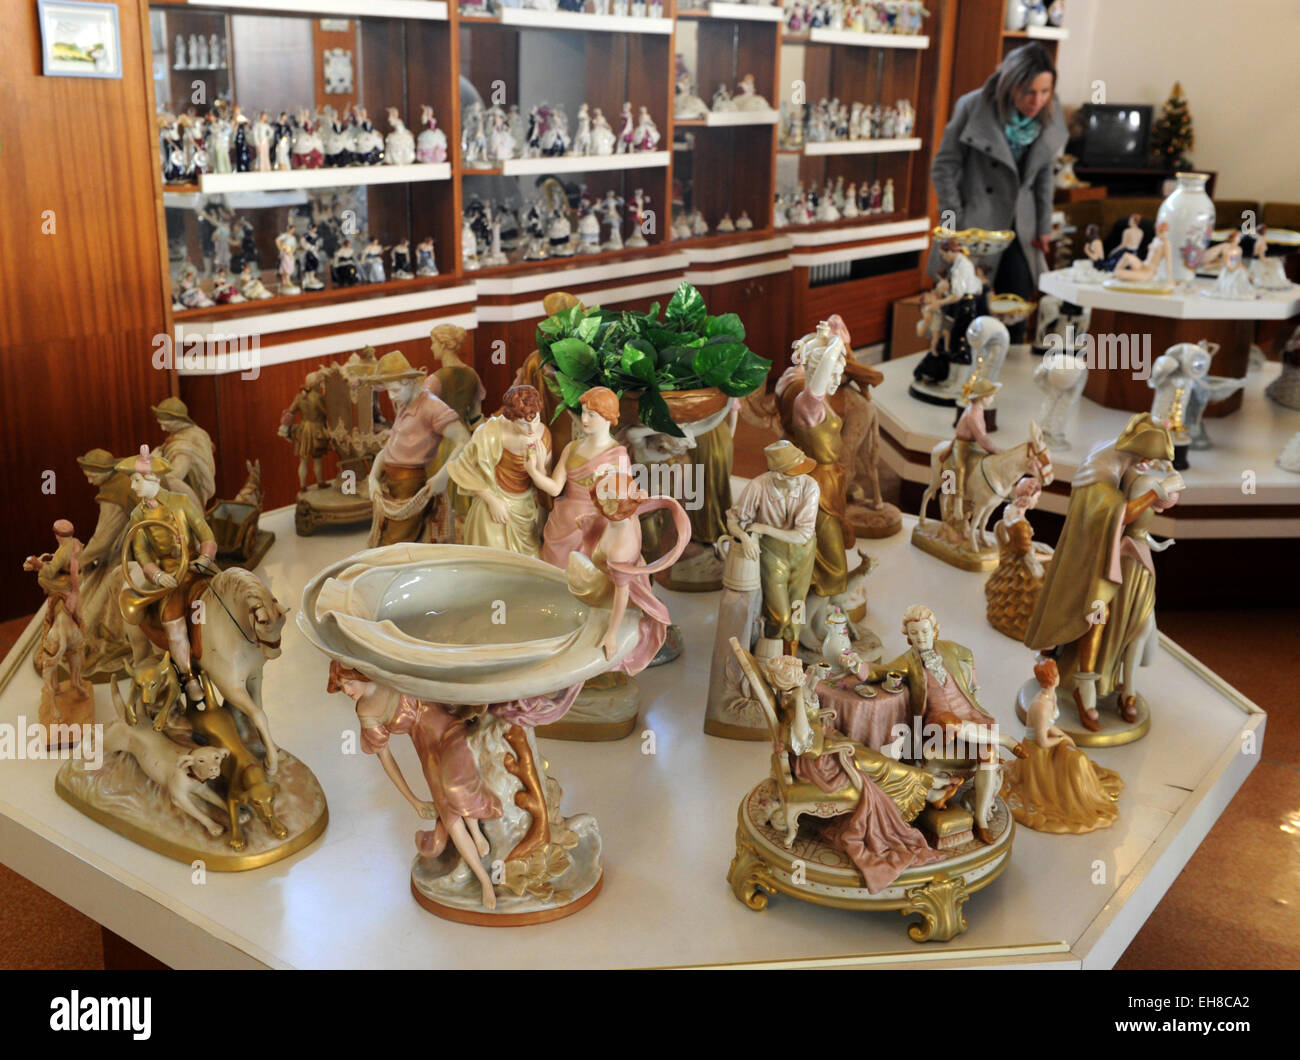 Royal Dux, a Czech producer of figurative porcelain, acquired new ...